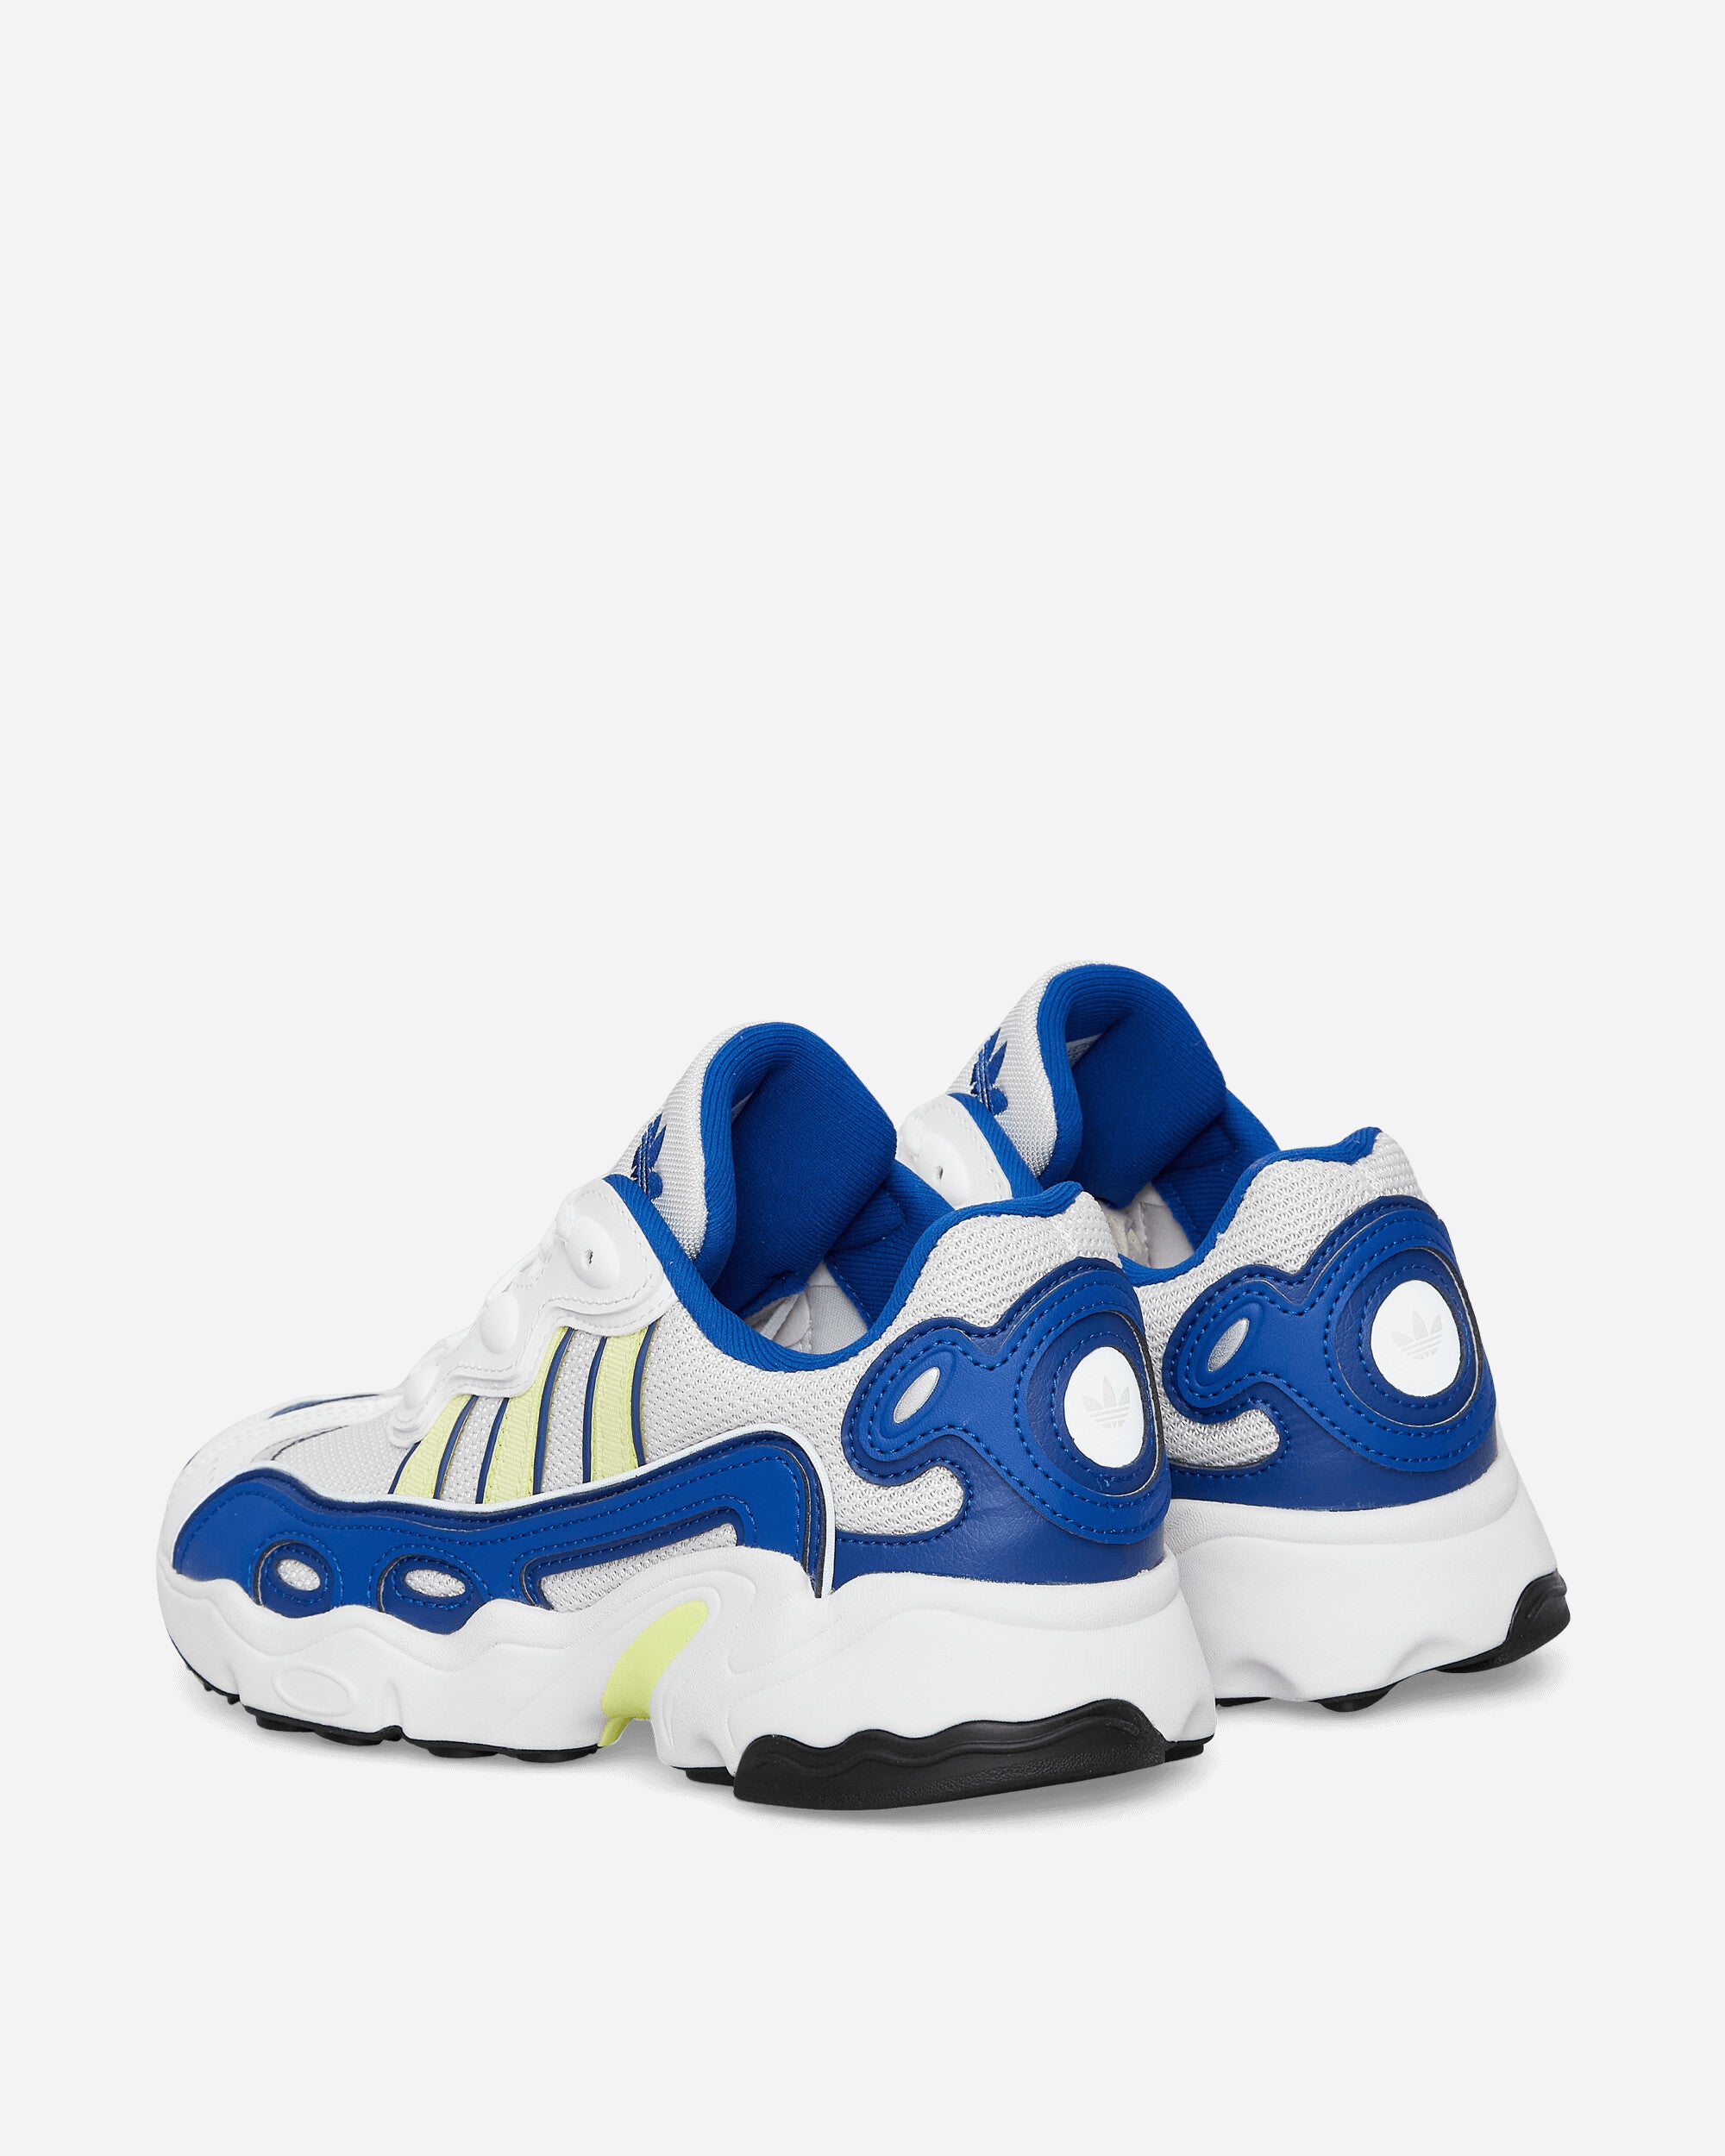 adidas Wmns Ozweego Og W White/Yellow Sneakers Low IE6998 001